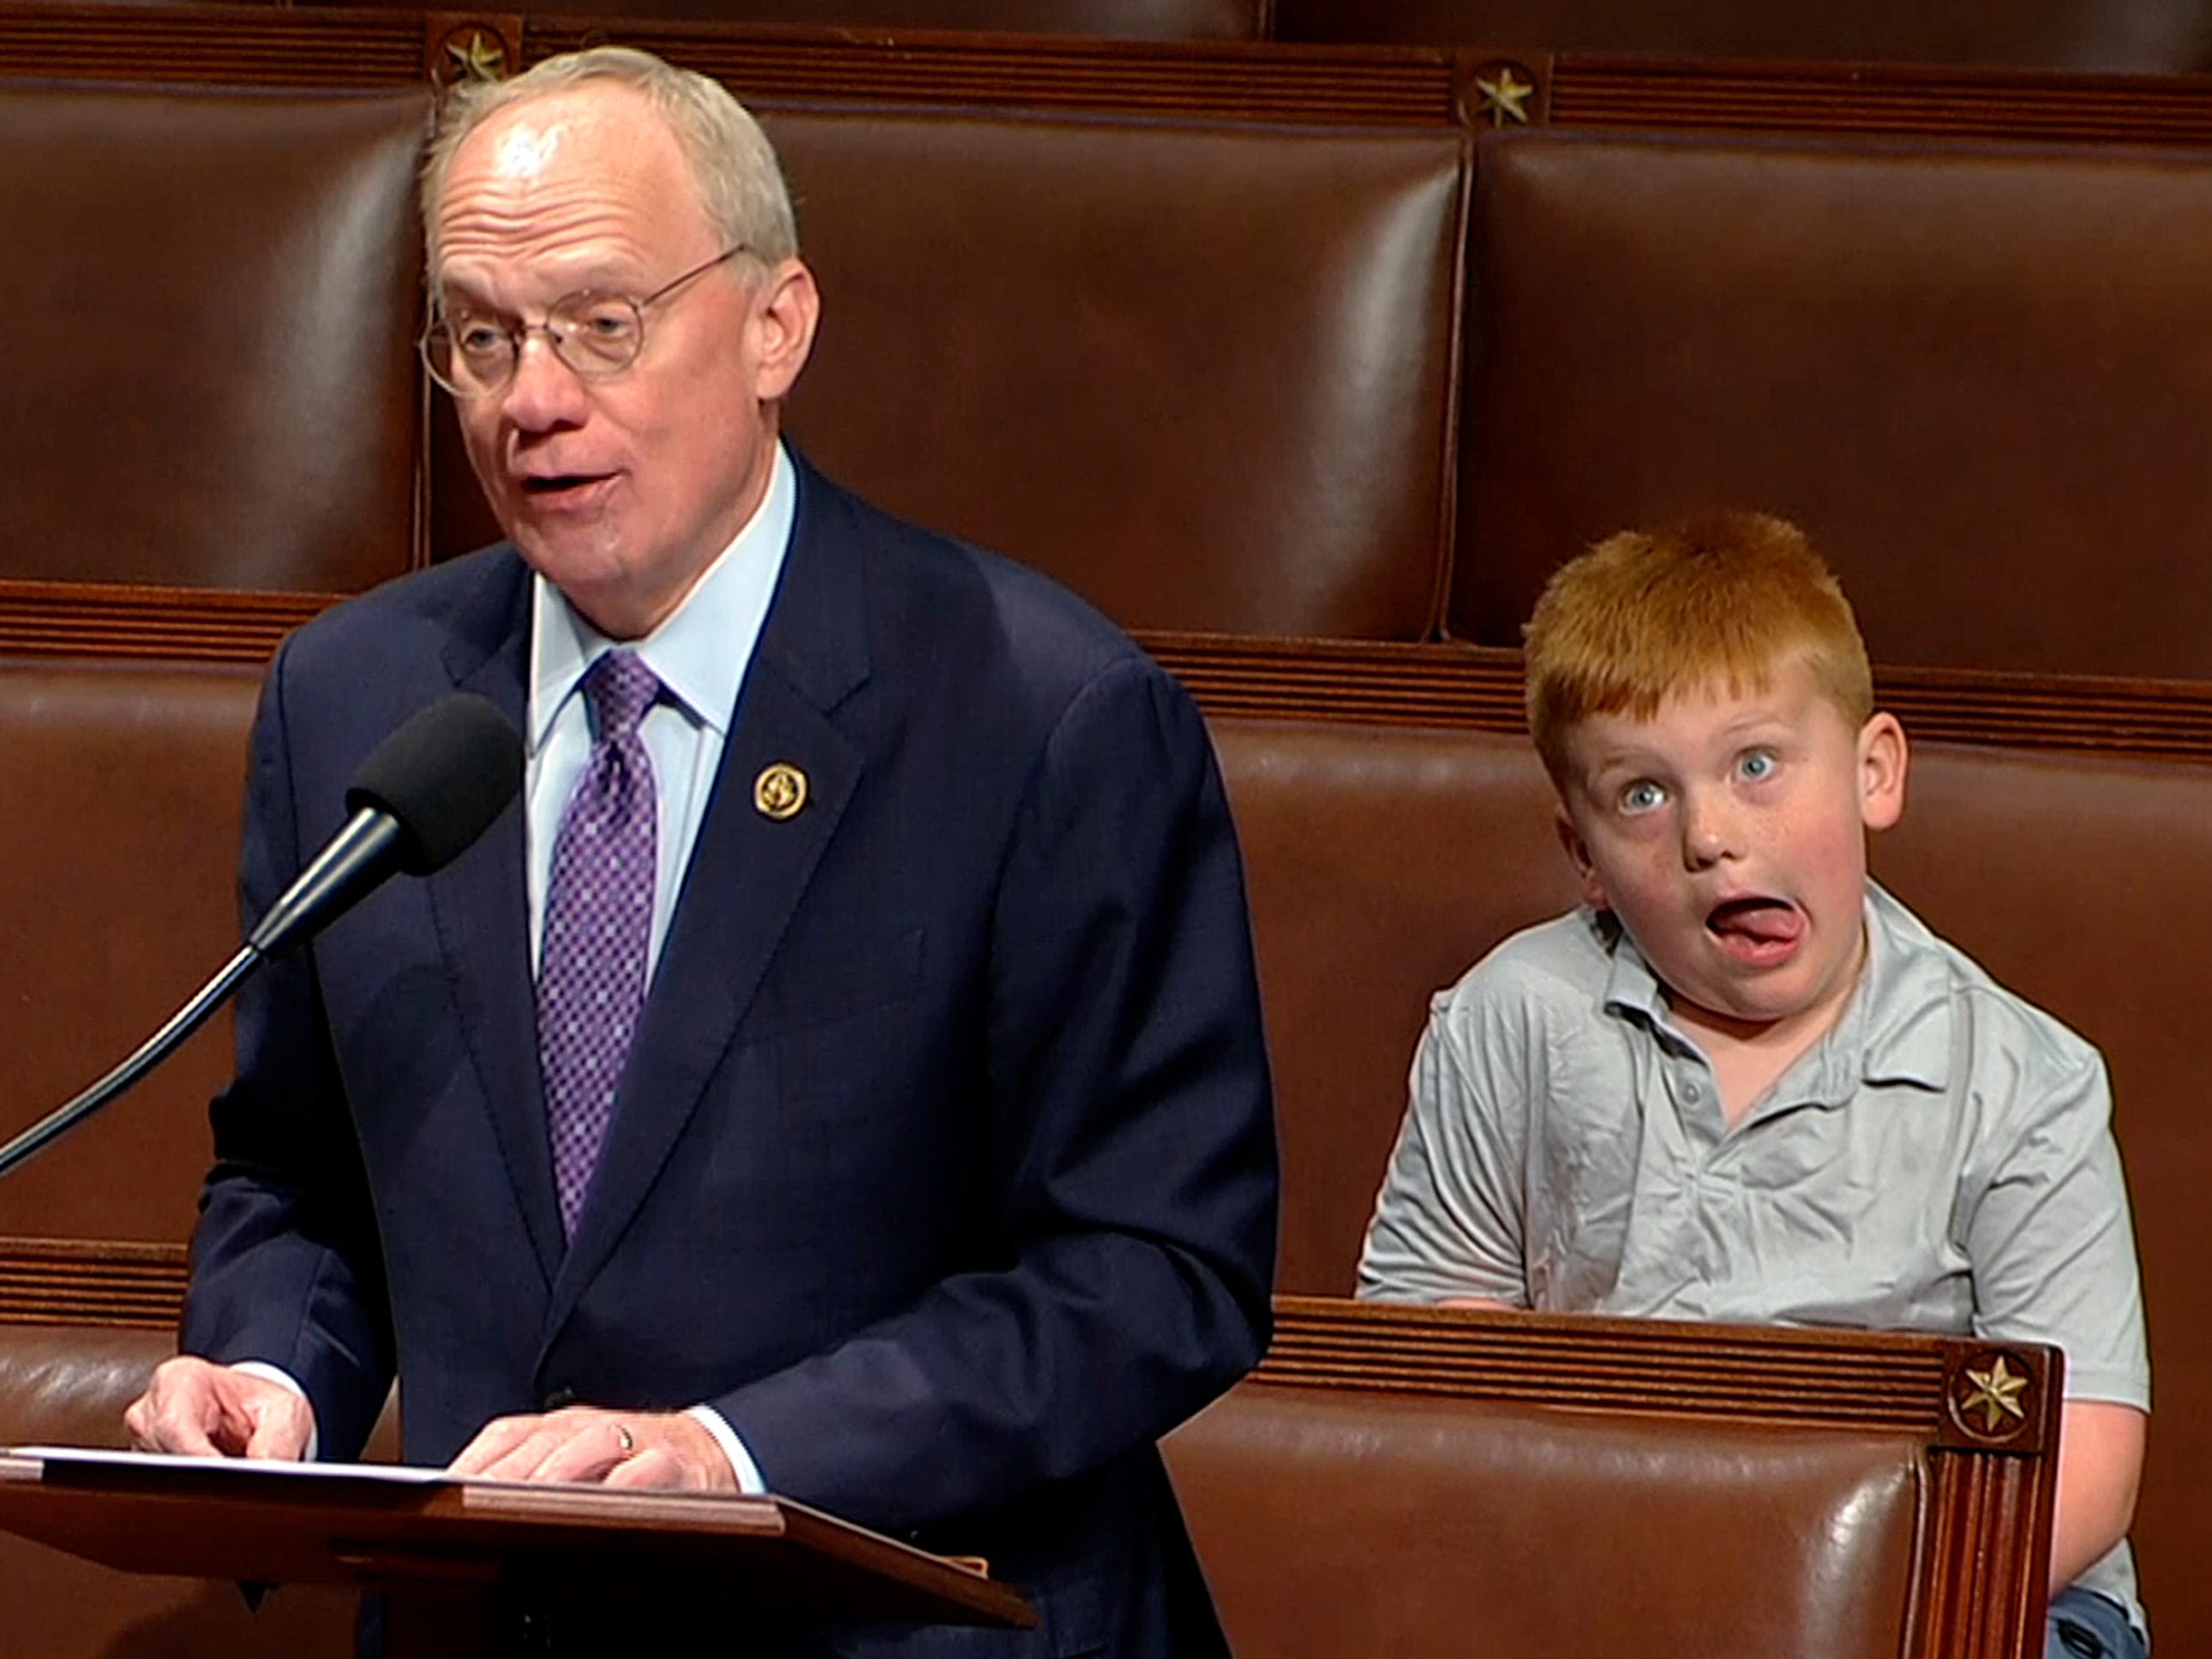 This congressman's kid embodies how everyone probably feels about politics right now